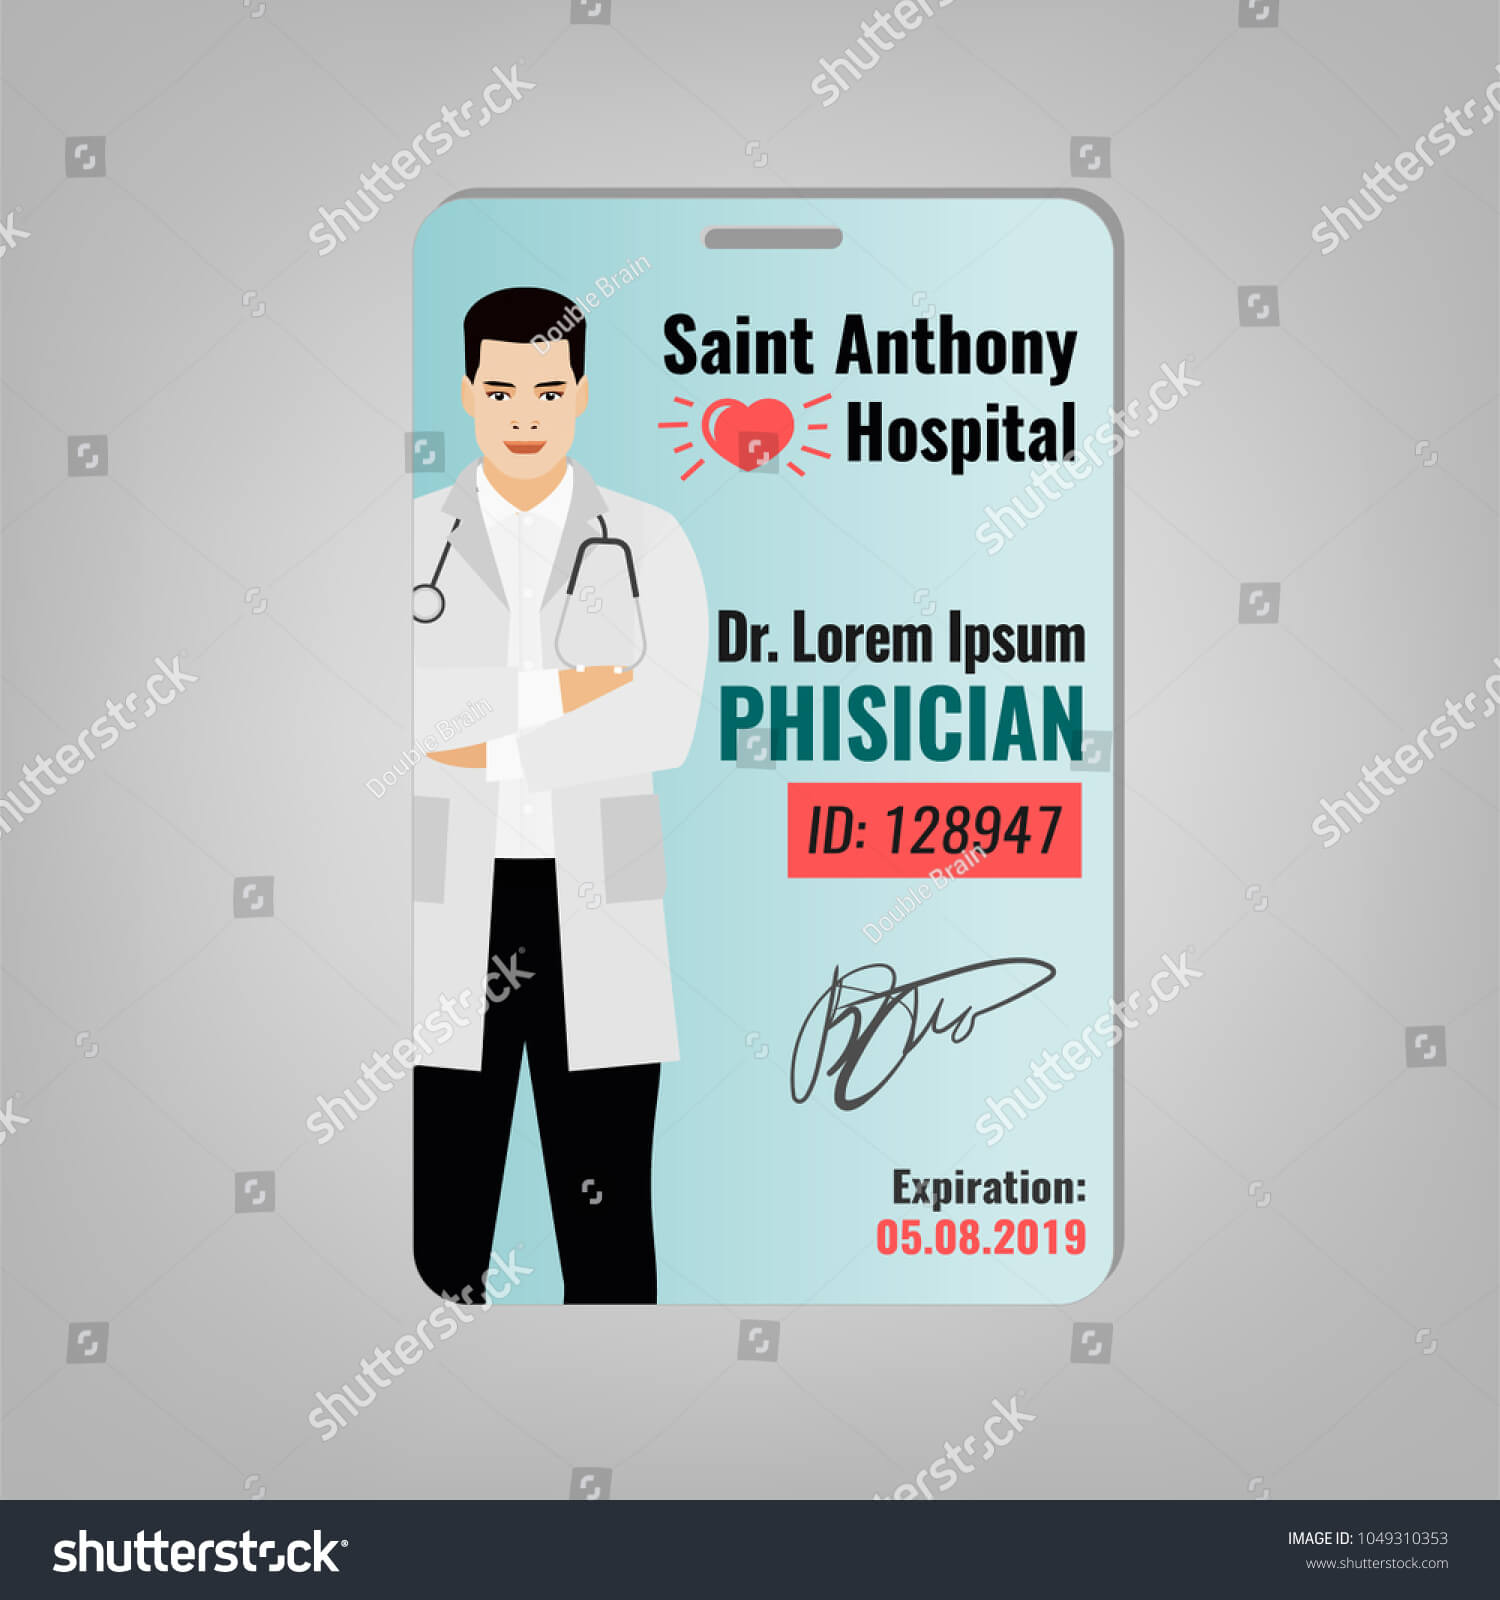 Doctors Id Card Hospital Logo Phisician Stock Image Within Hospital Id Card Template